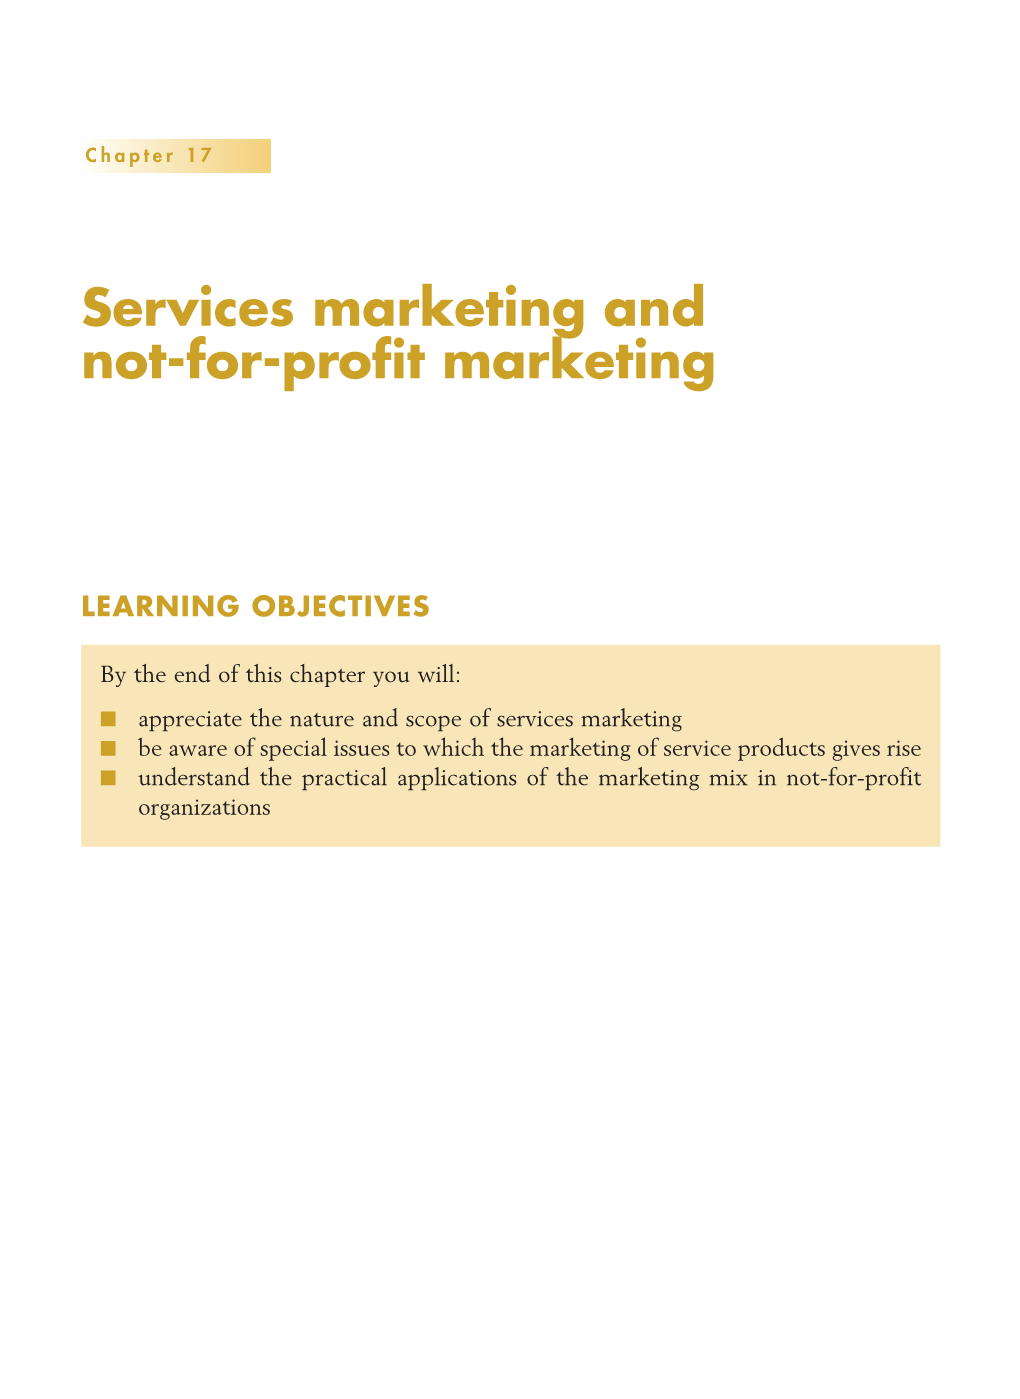 Services Marketing and Not-For-Profit Marketing